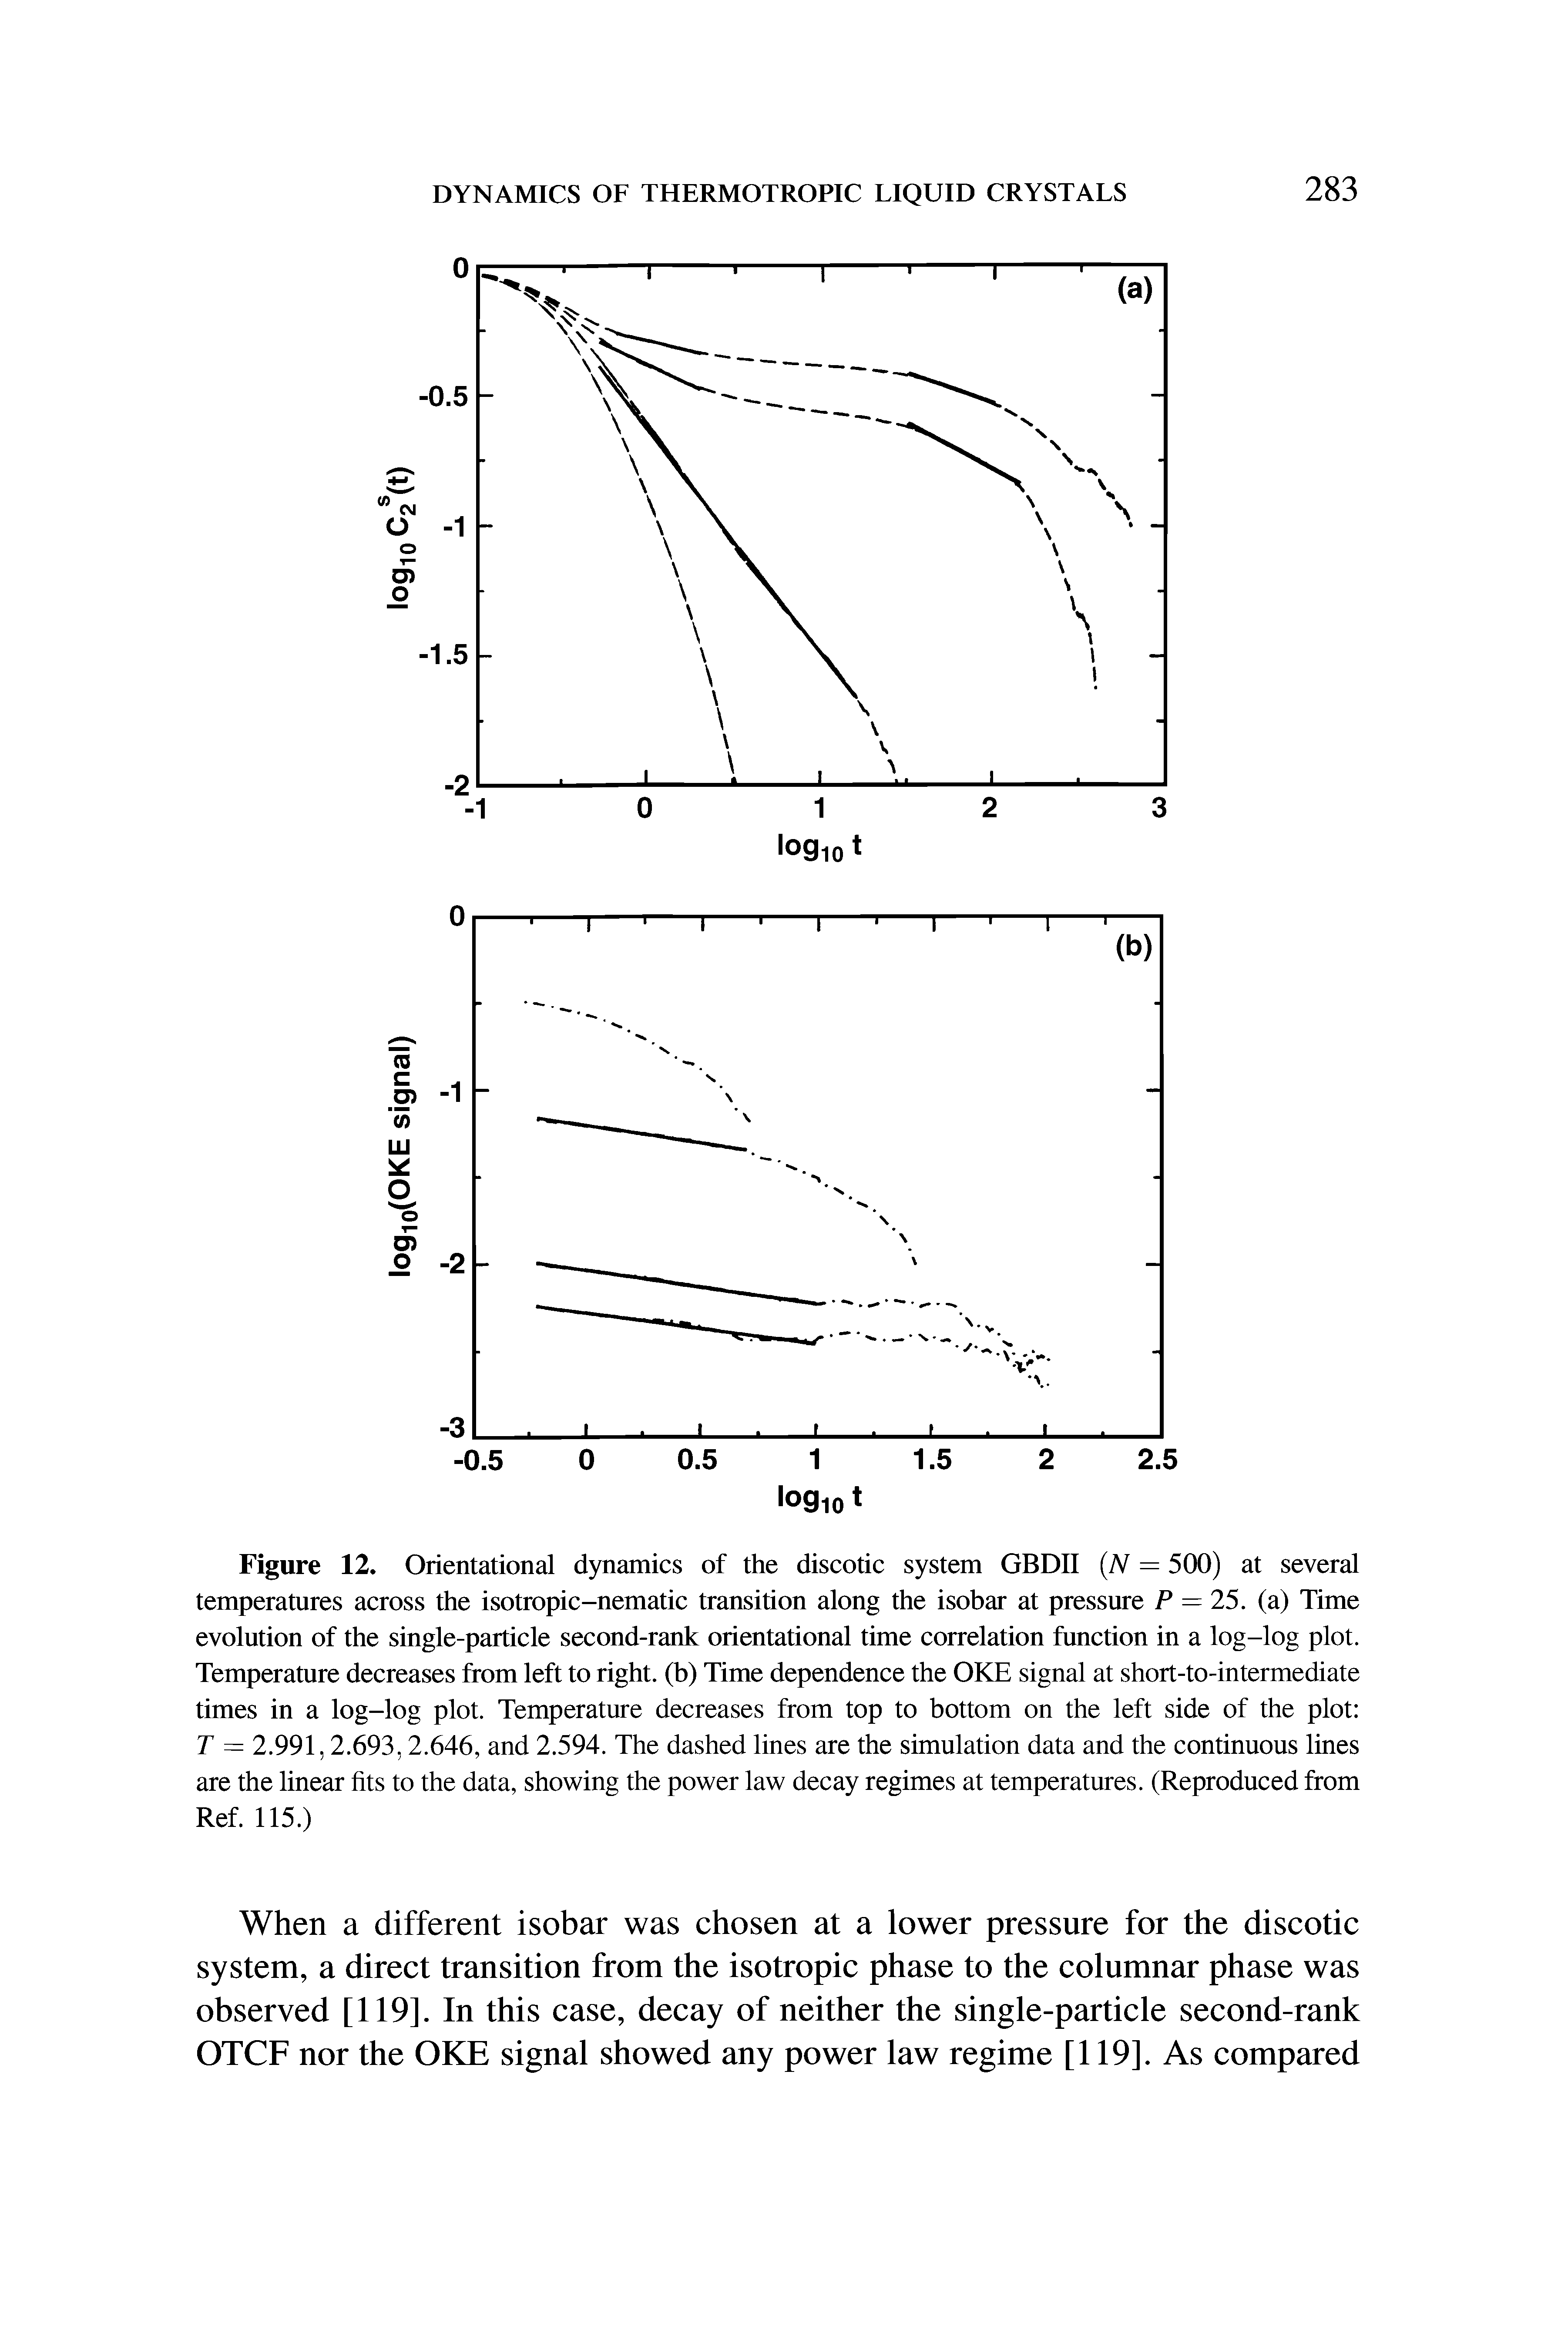 Figure 12. Orientational dynamics of the discotic system GBDII (N = 500) at several temperatures across the isotropic-nematic transition along the isobar at pressure P — 25. (a) Time evolution of the single-particle second-rank orientational time correlation function in a log-log plot. Temperature decreases from left to right, (b) Time dependence the OKE signal at short-to-intermediate times in a log-log plot. Temperature decreases from top to bottom on the left side of the plot T = 2.991,2.693,2.646, and 2.594. The dashed lines are the simulation data and the continuous lines are the linear fits to the data, showing the power law decay regimes at temperatures. (Reproduced from Ref. 115.)...